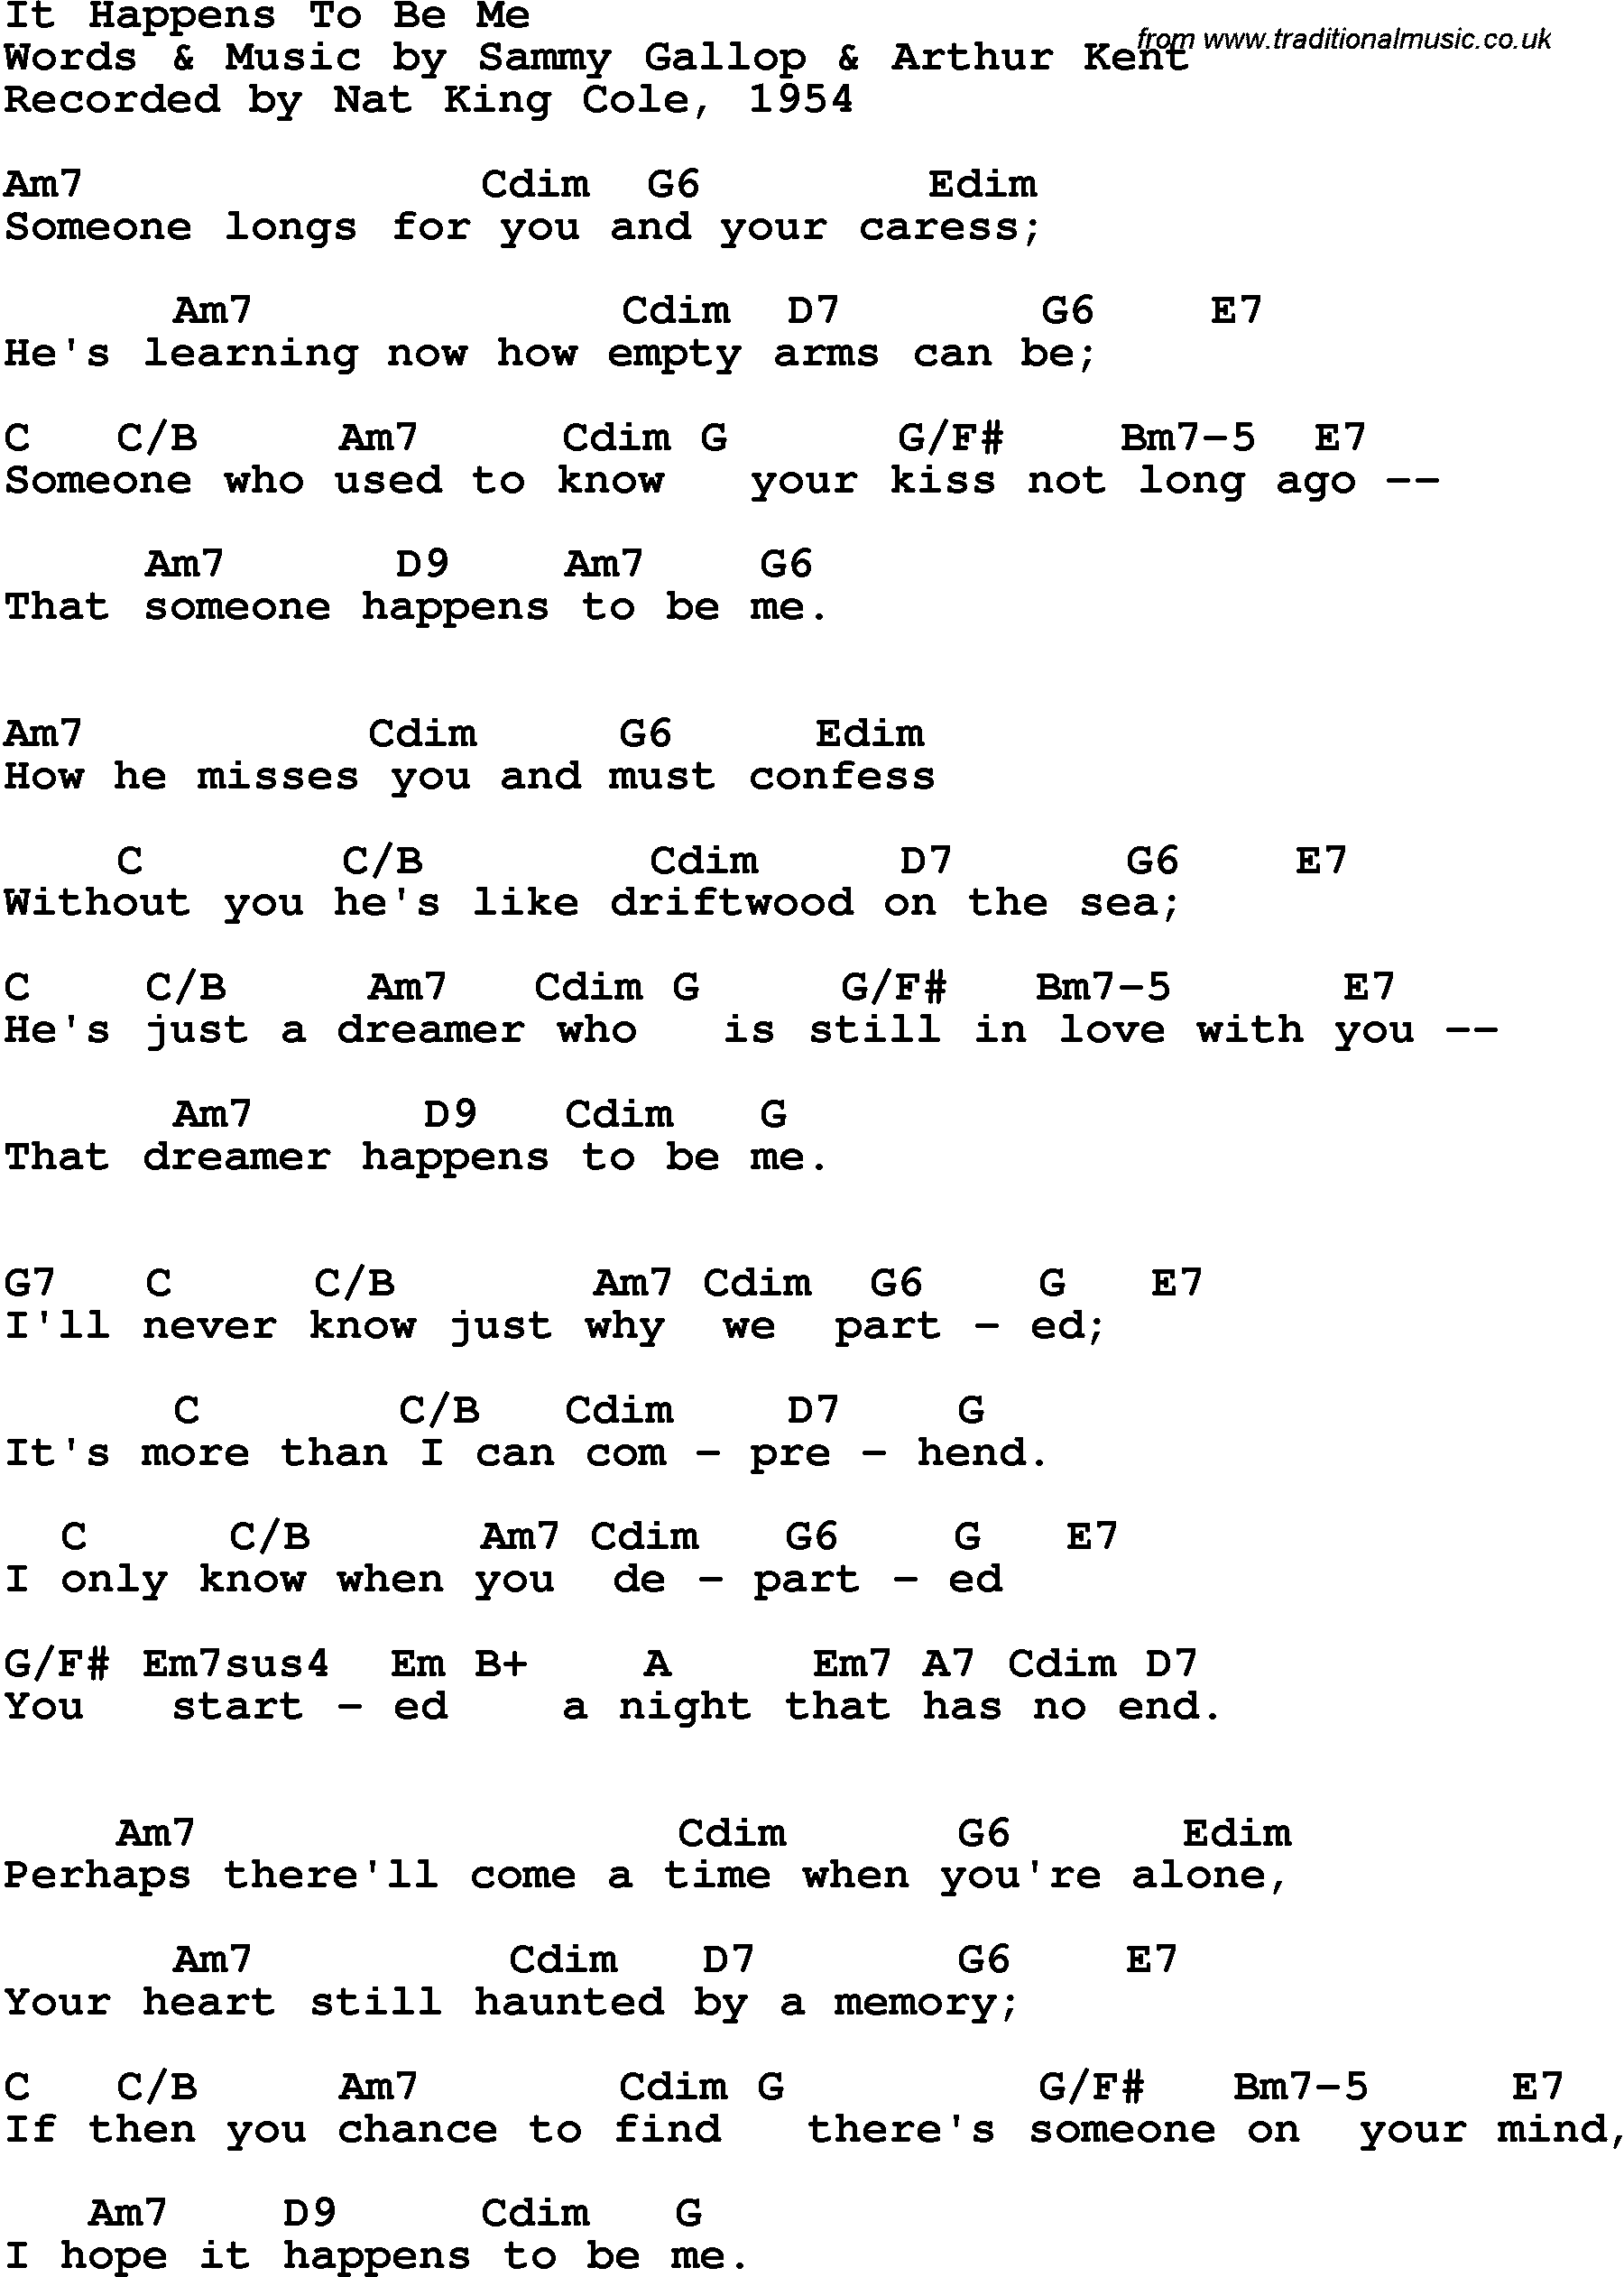 Song Lyrics with guitar chords for It Happened In Monterey - Frank Sinatra, 1955